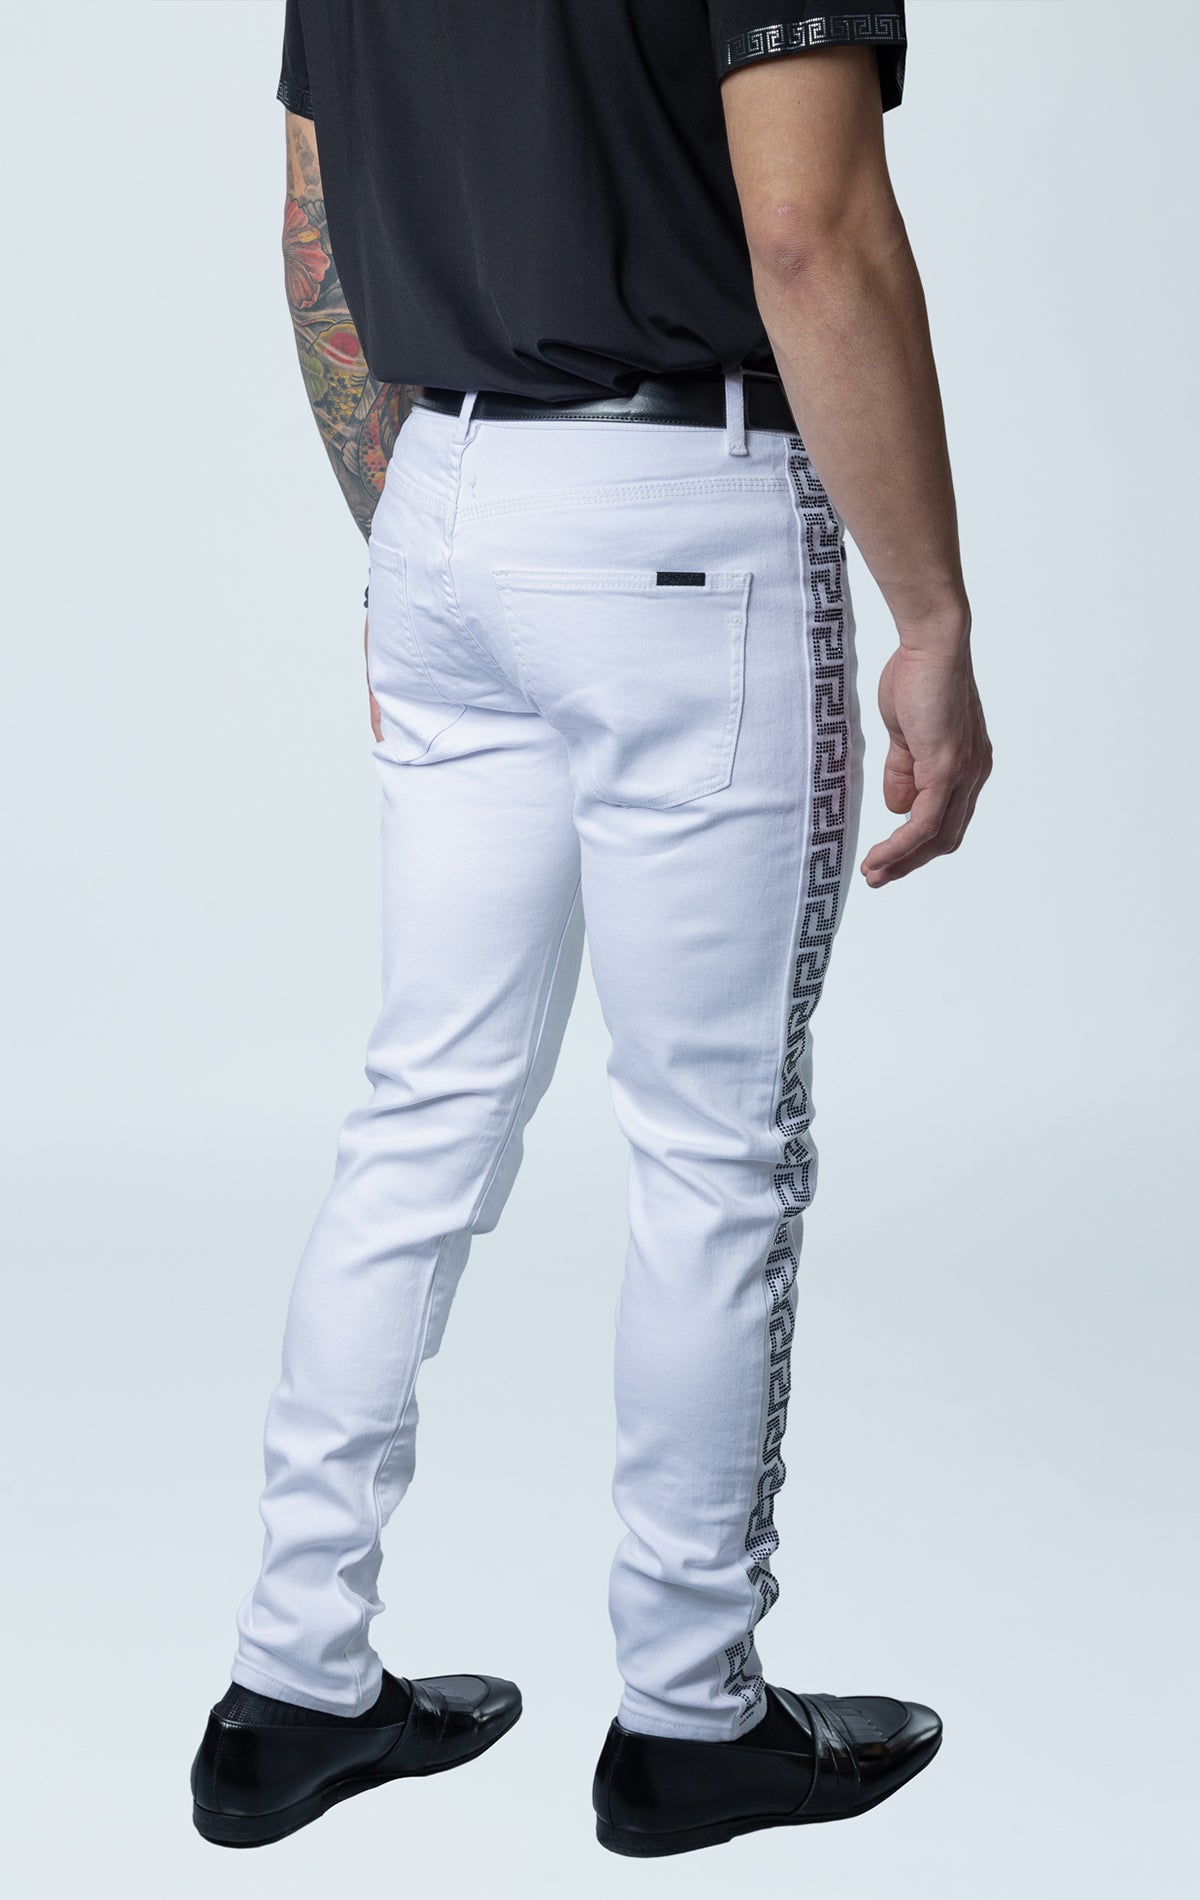 White high quality denim pants with side stripe taping.